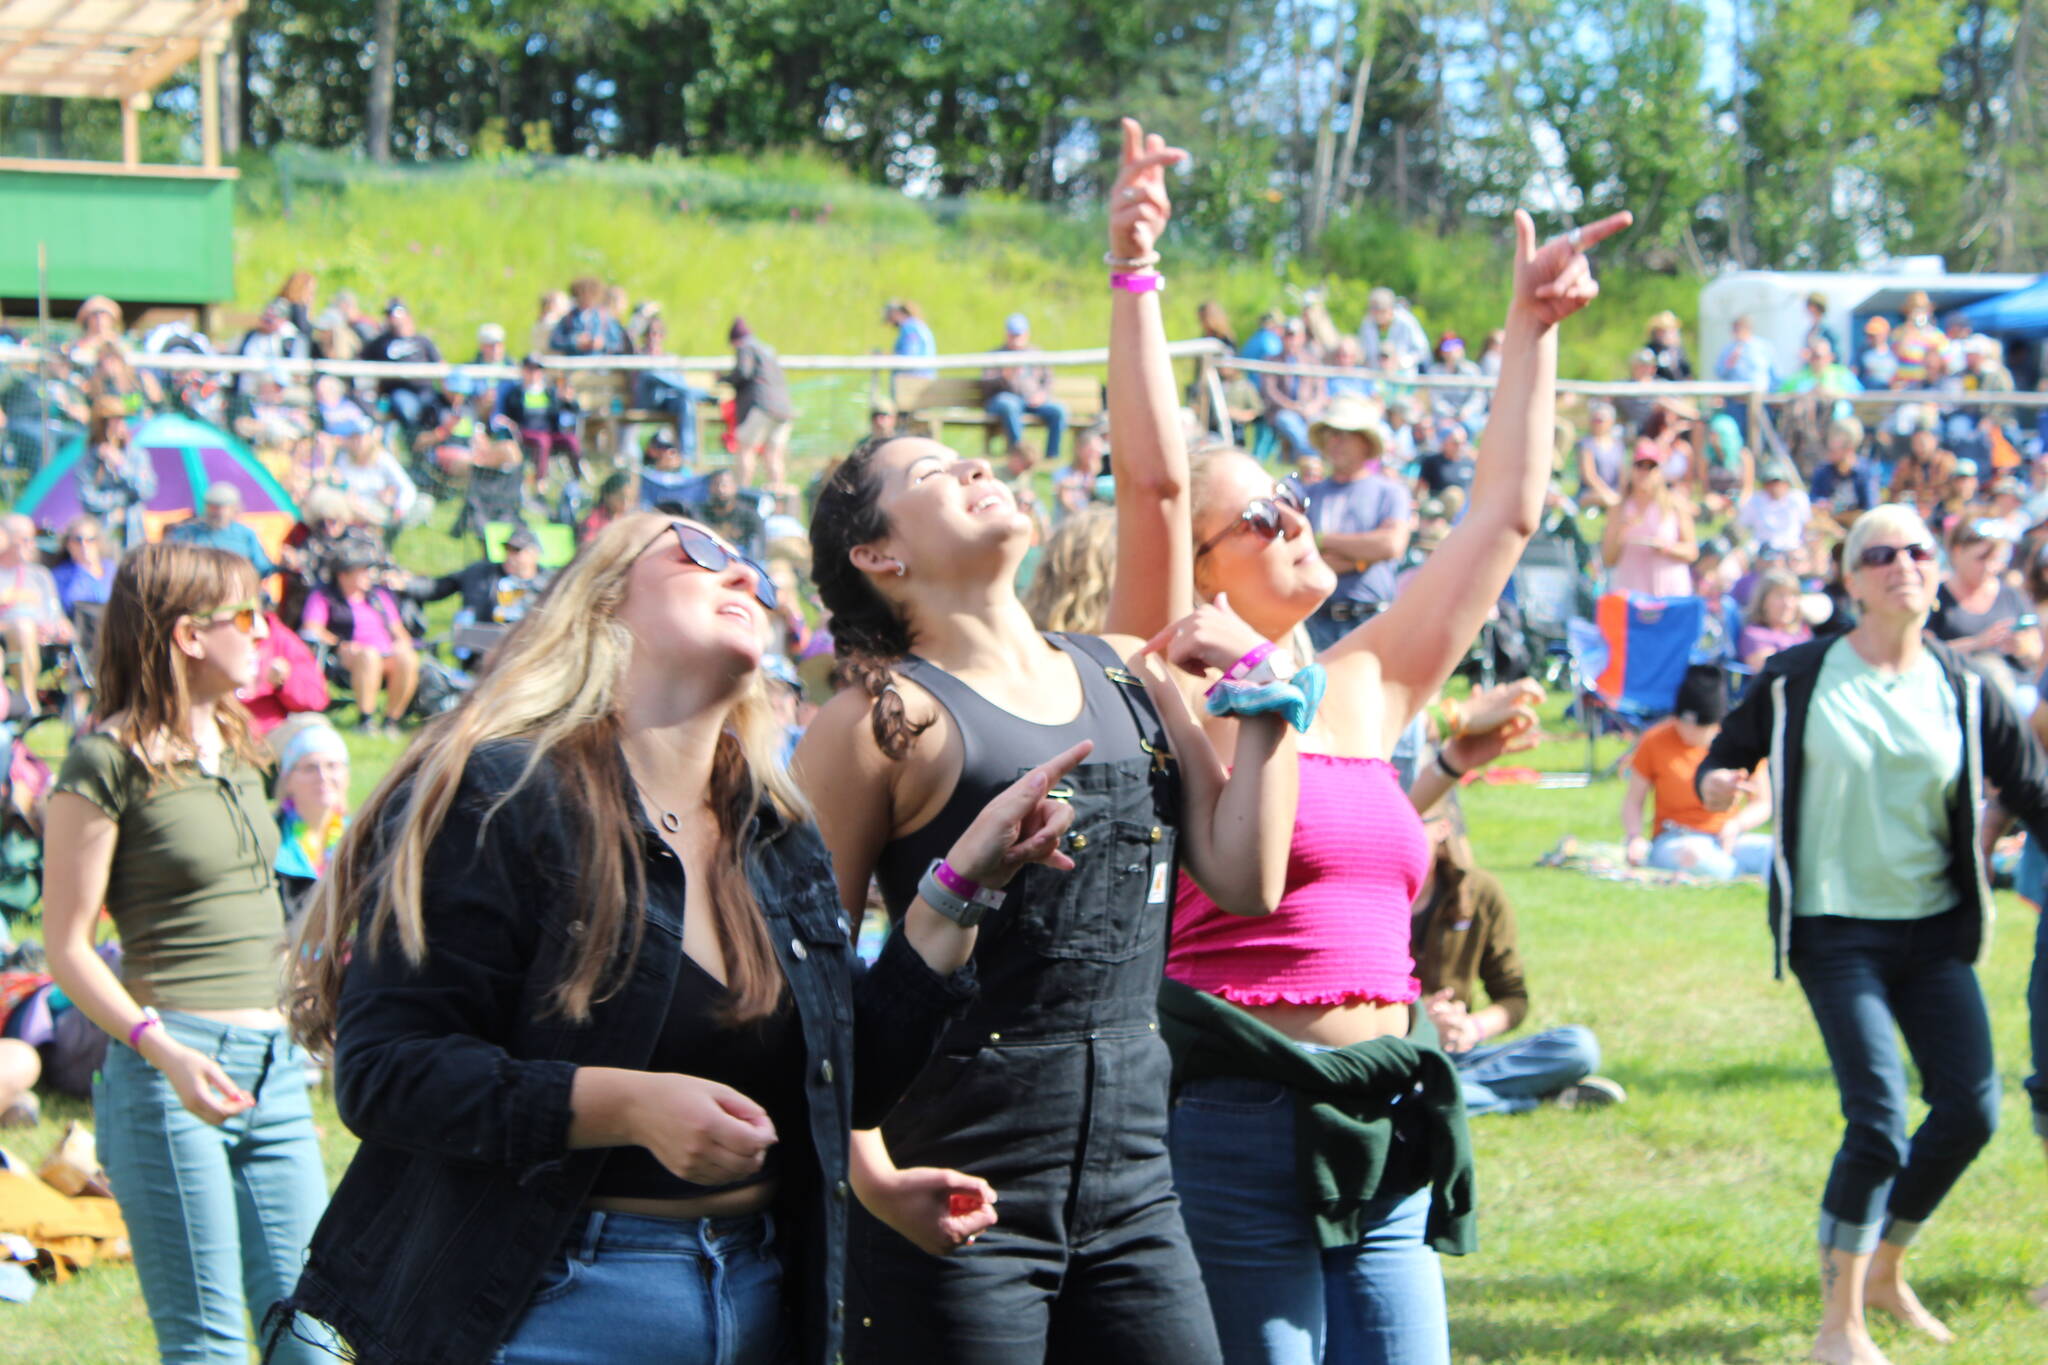 People gather in Ninilchik, Alaska on Friday, August 5, 2022 for Salmonfest, an annual event that raises awareness about salmon-related causes. (Camille Botello/Peninsula Clarion)